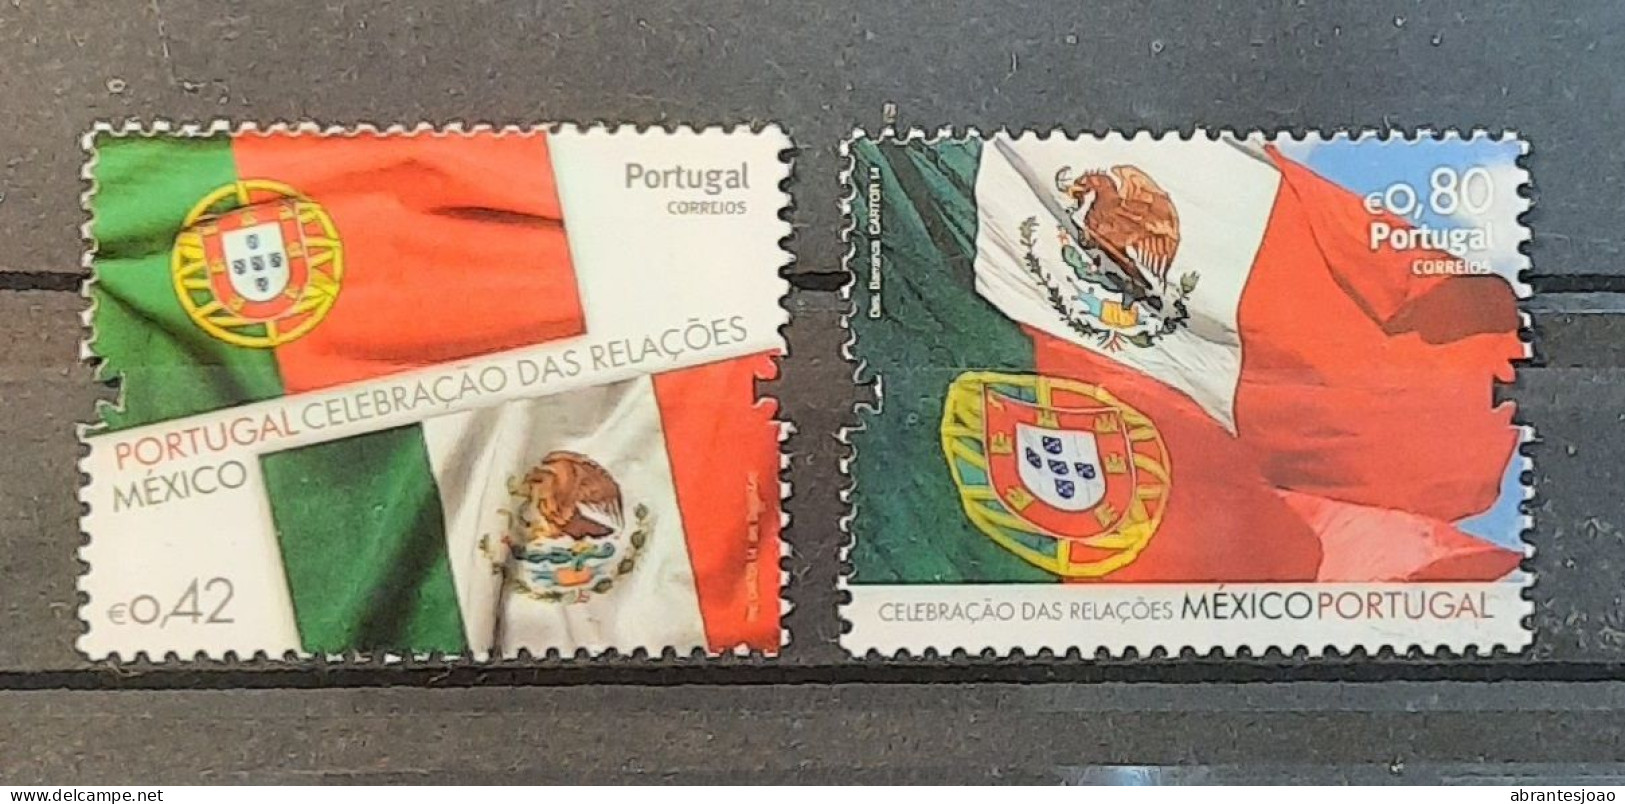 2014 - Portugal - Celebrating Relationship With Mexico - MNH - 2 Stamps - Ongebruikt